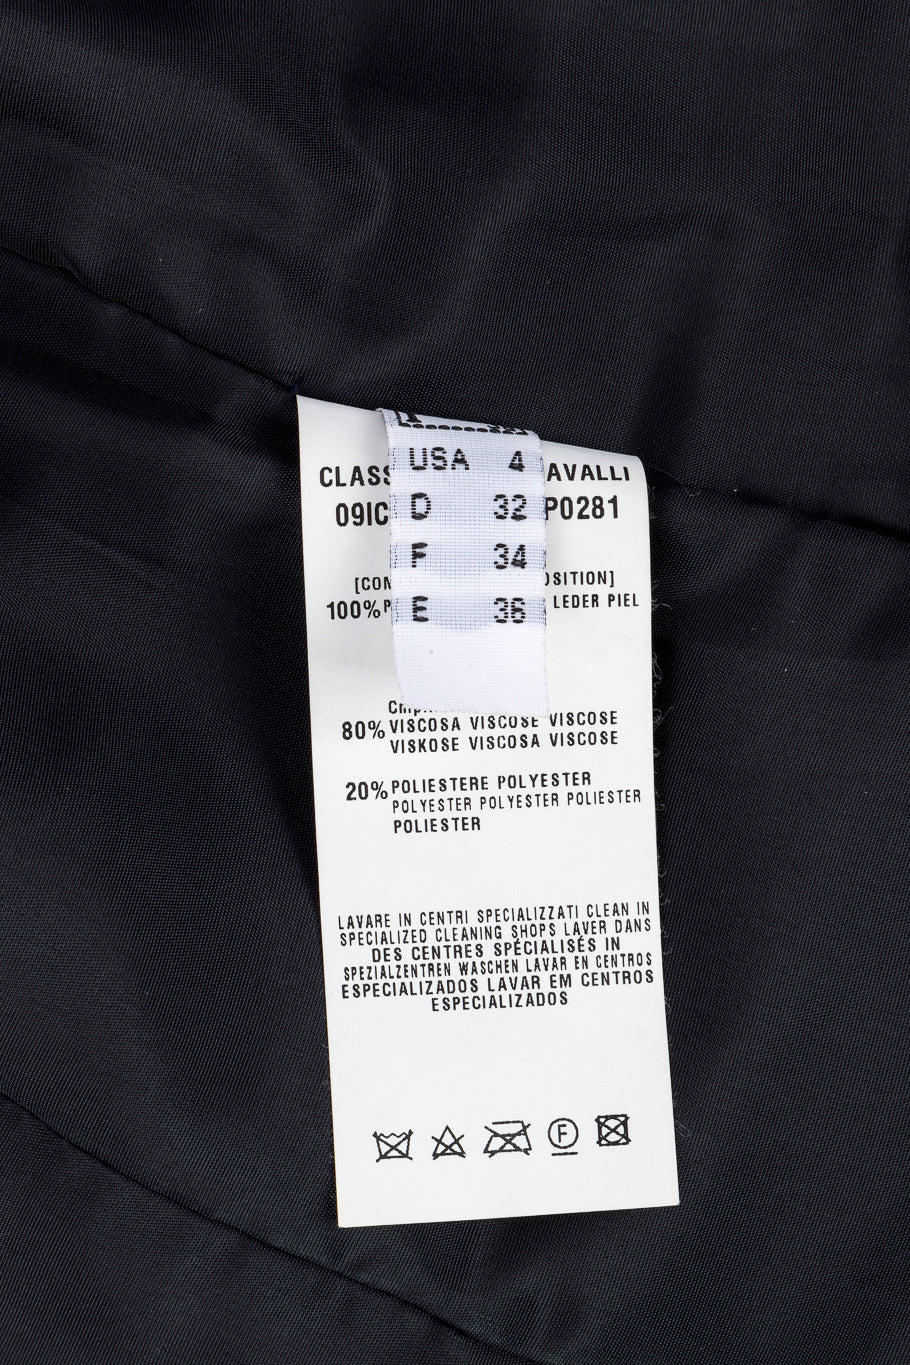 Class Roberto Cavalli Studded Leather Trench Coat size and fabric content label closeup @recessla